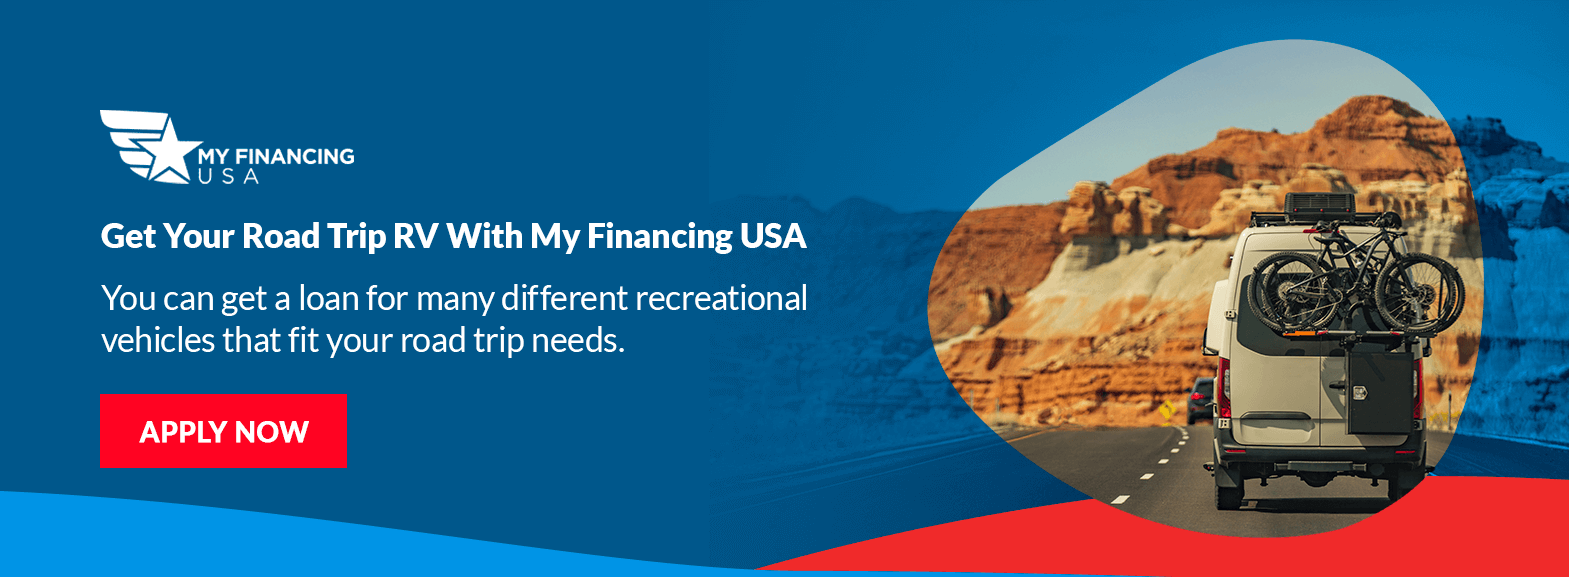 Get Your Road Trip RV With My Financing USA